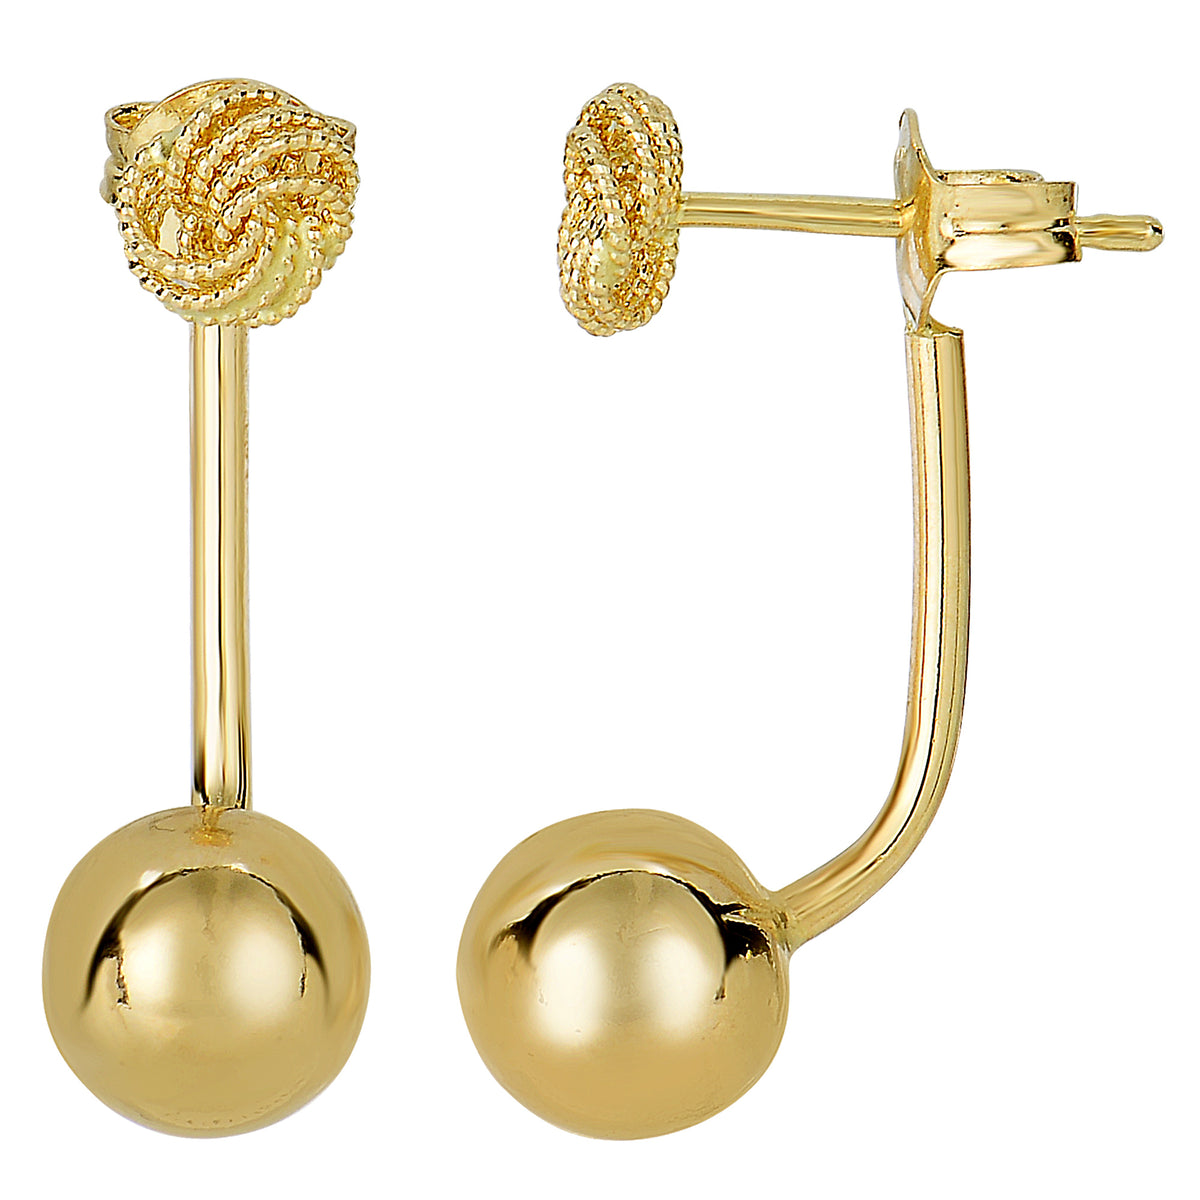 14k Yellow Gold Ball And Love Knot Belly Ring Climber Style Earrings, 8mm